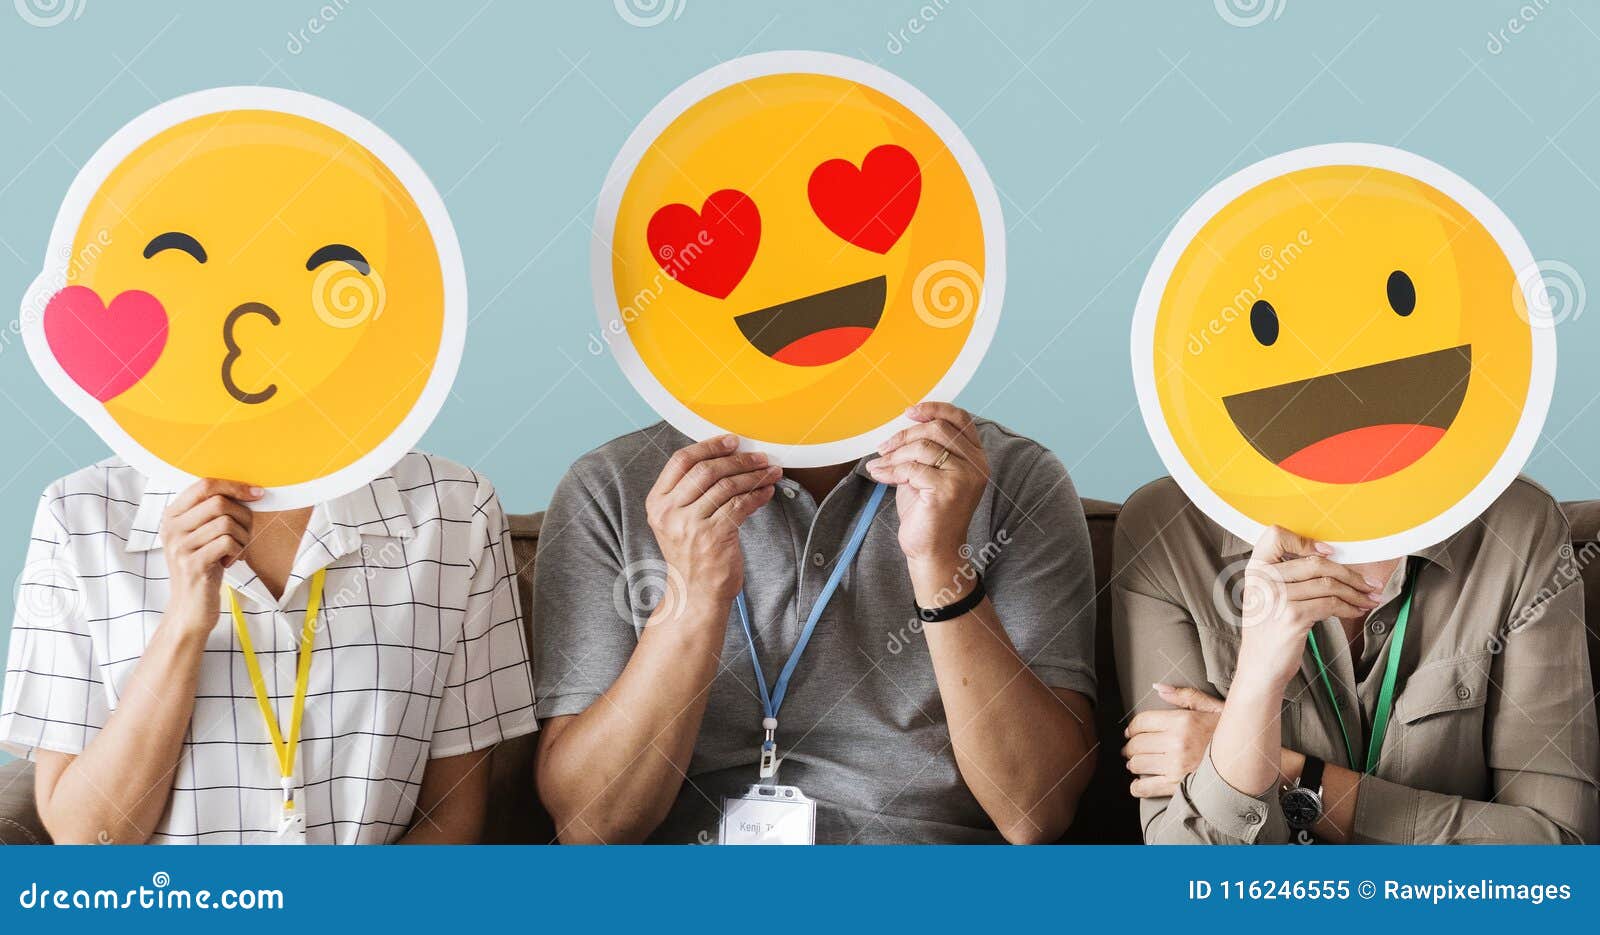 workers holding happy face emojis